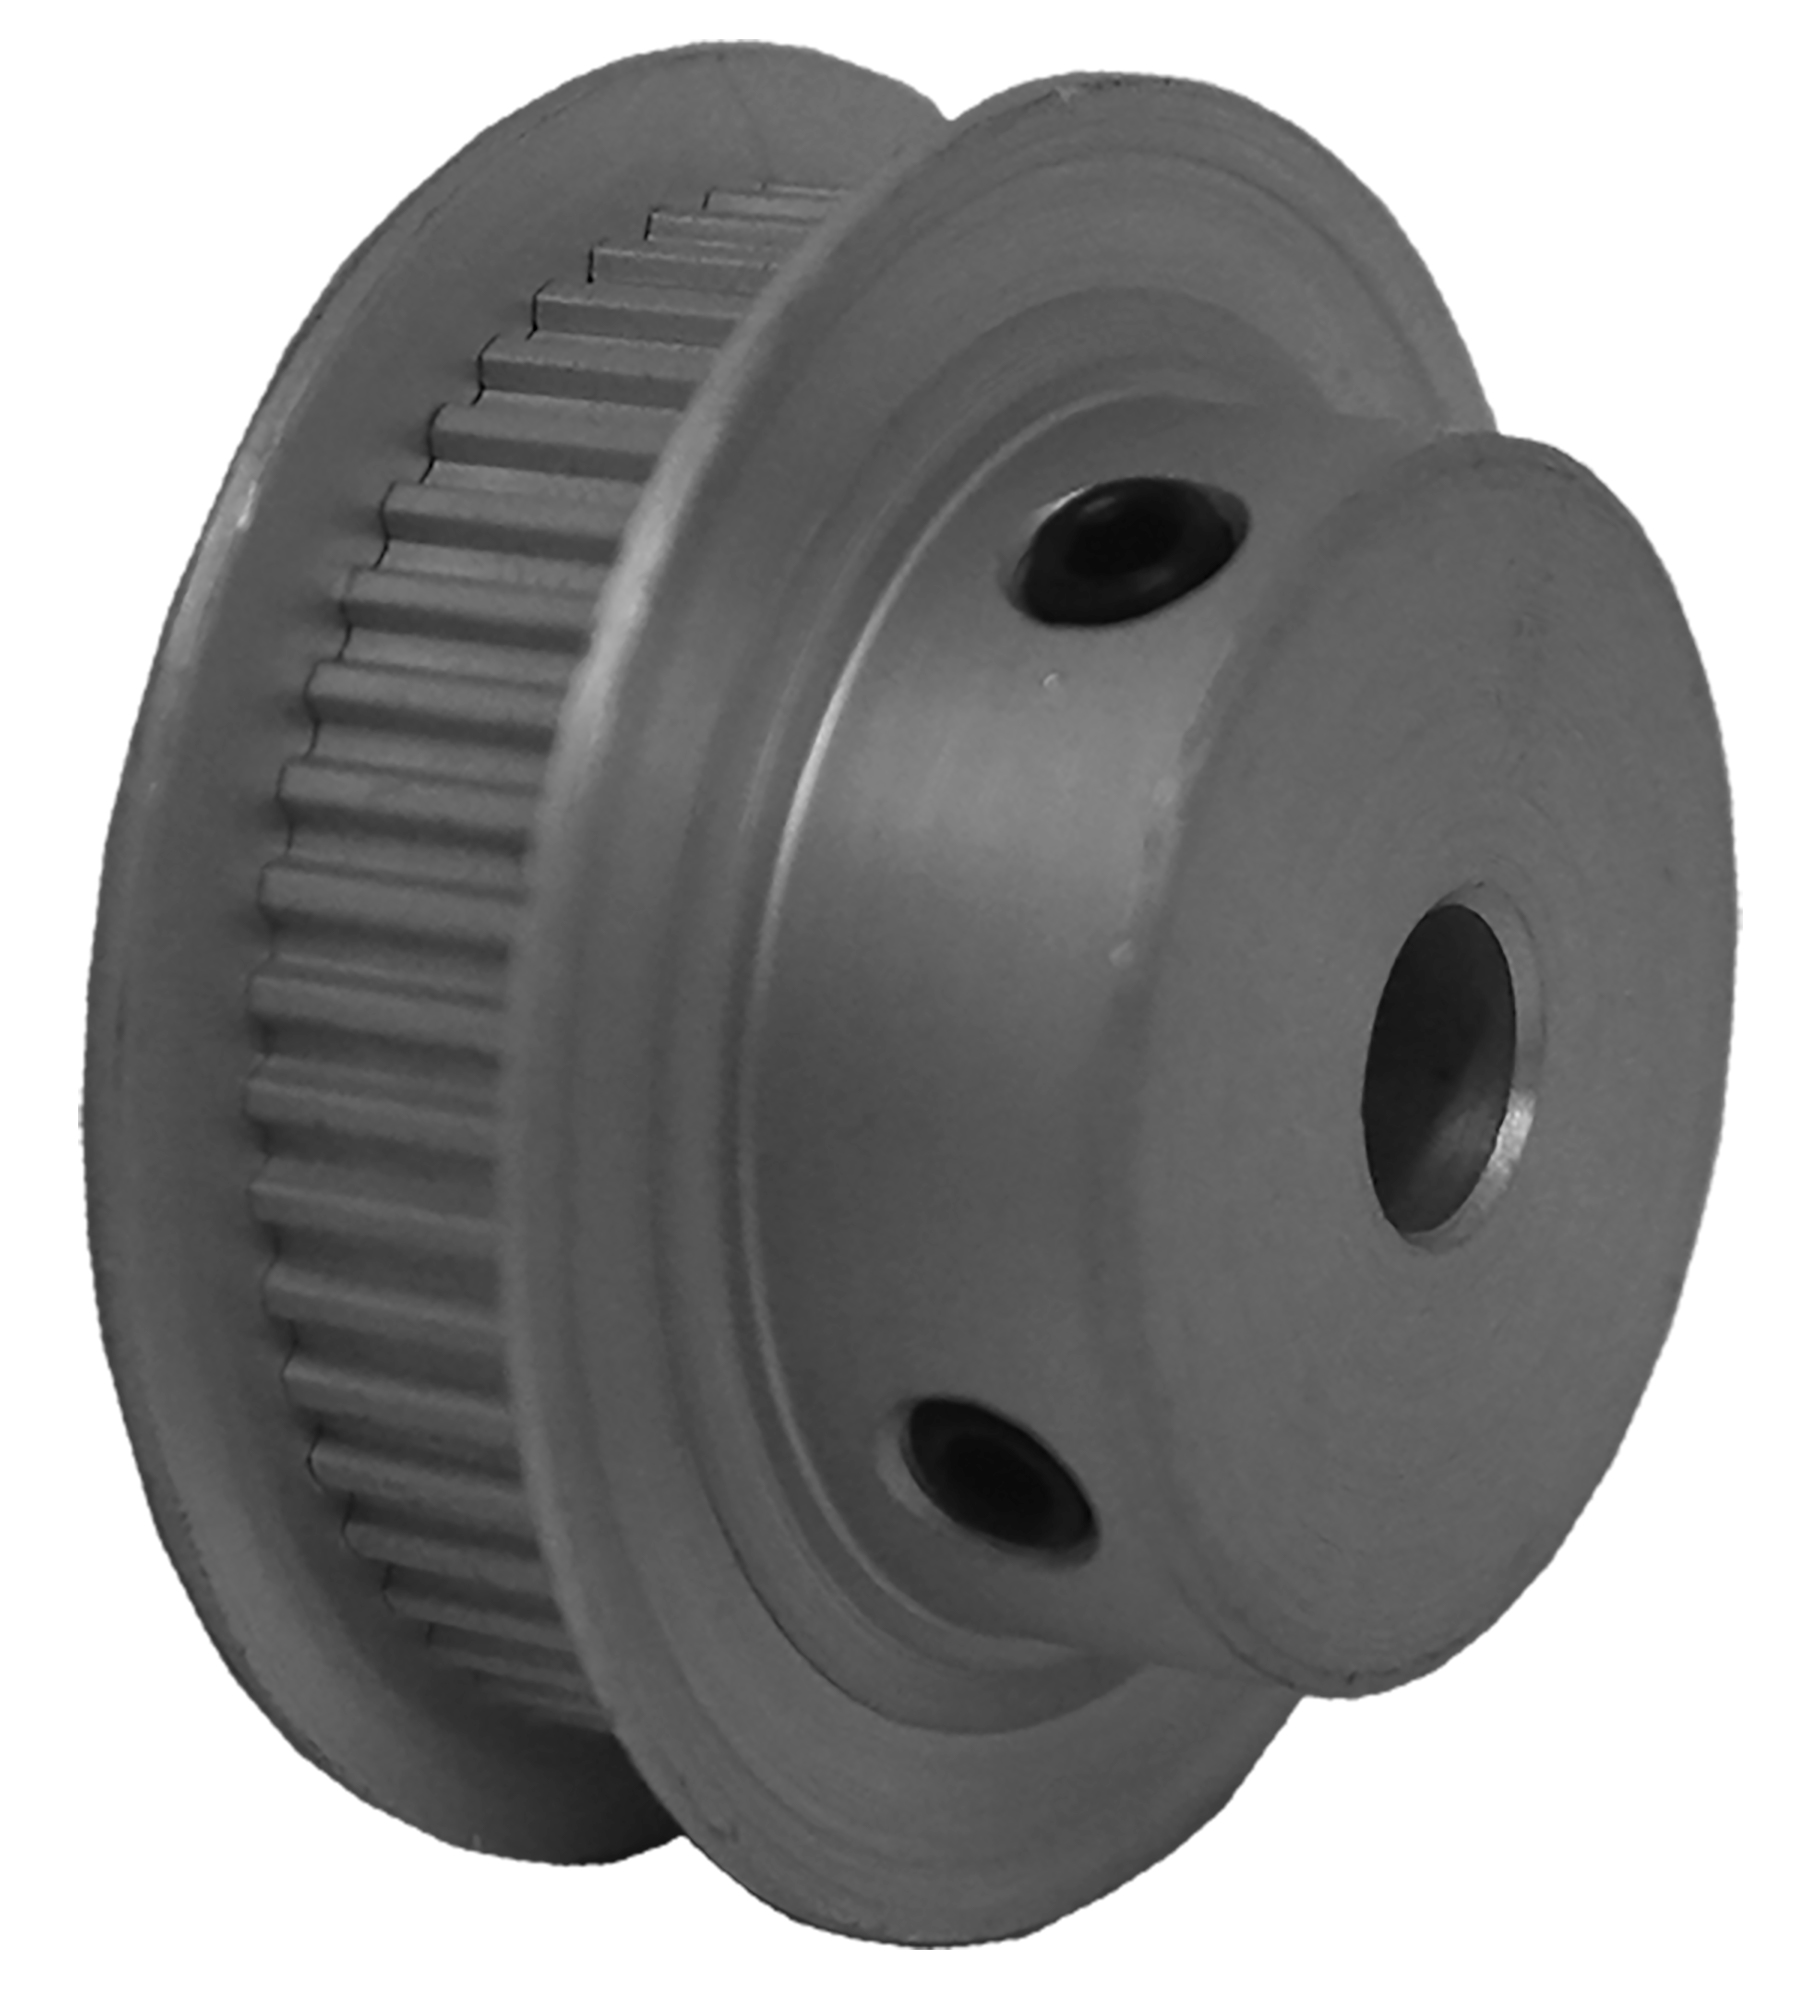 50MP025-6FA3 - Aluminum Imperial Pitch Pulleys